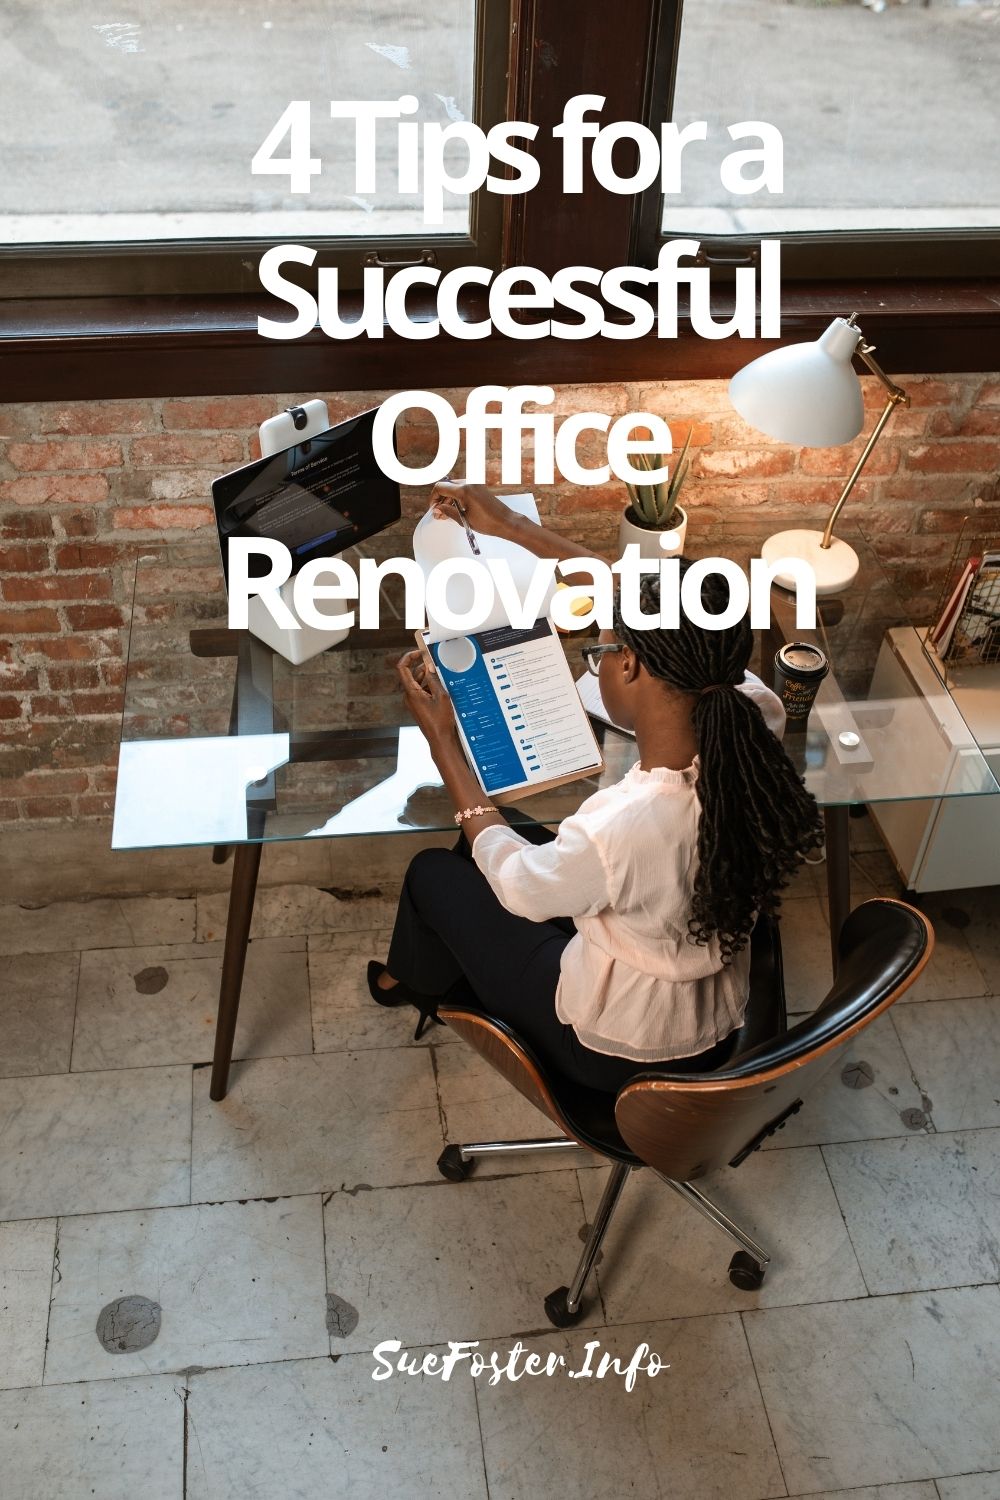 If your office space isn’t quite up to scratch, you might want to think about making a few renovations to improve it for you, your staff, and your customers.